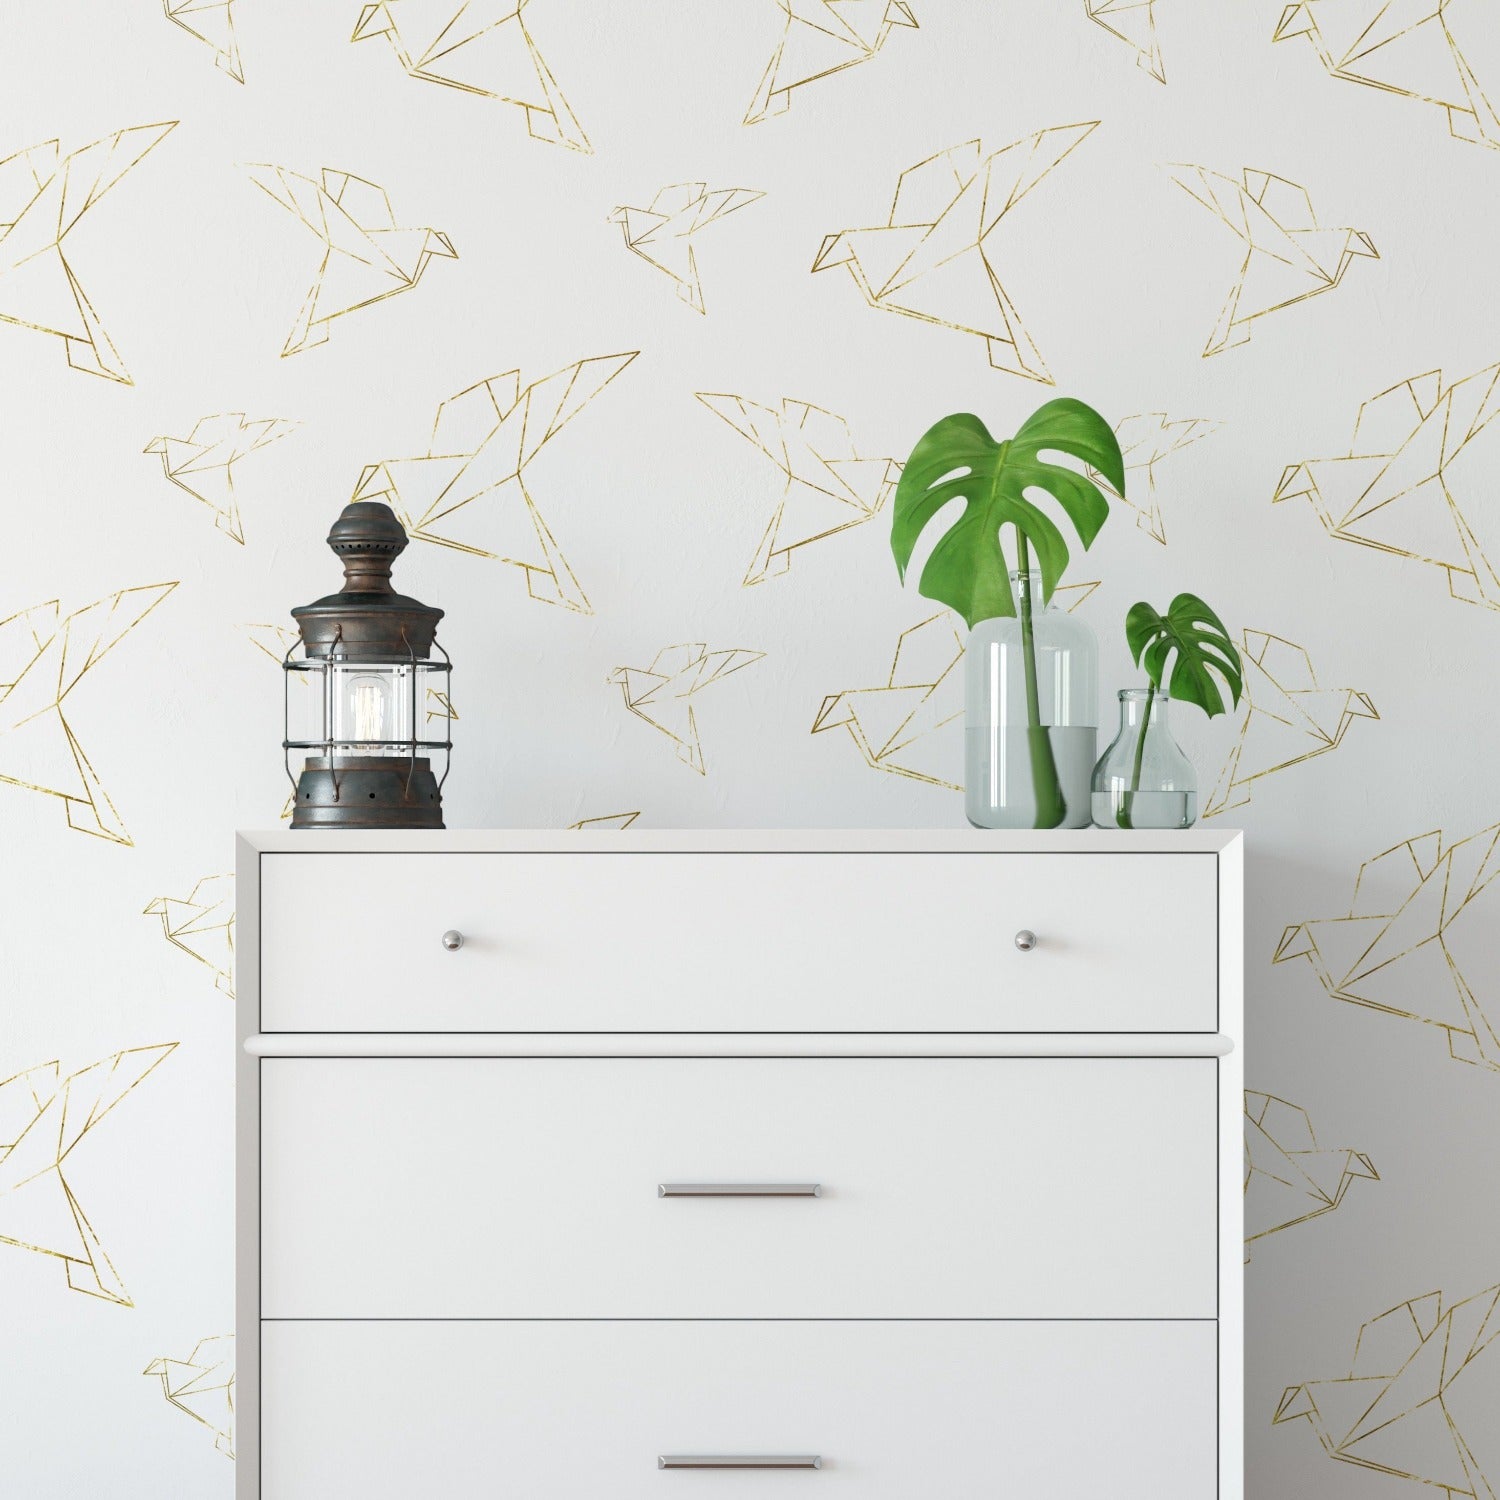 Contemporary room with Gold Origami Wallpaper - Gold Dove pattern. The wallpaper showcases intricate gold doves created from geometric lines, enhancing the room's modern and tranquil ambiance.